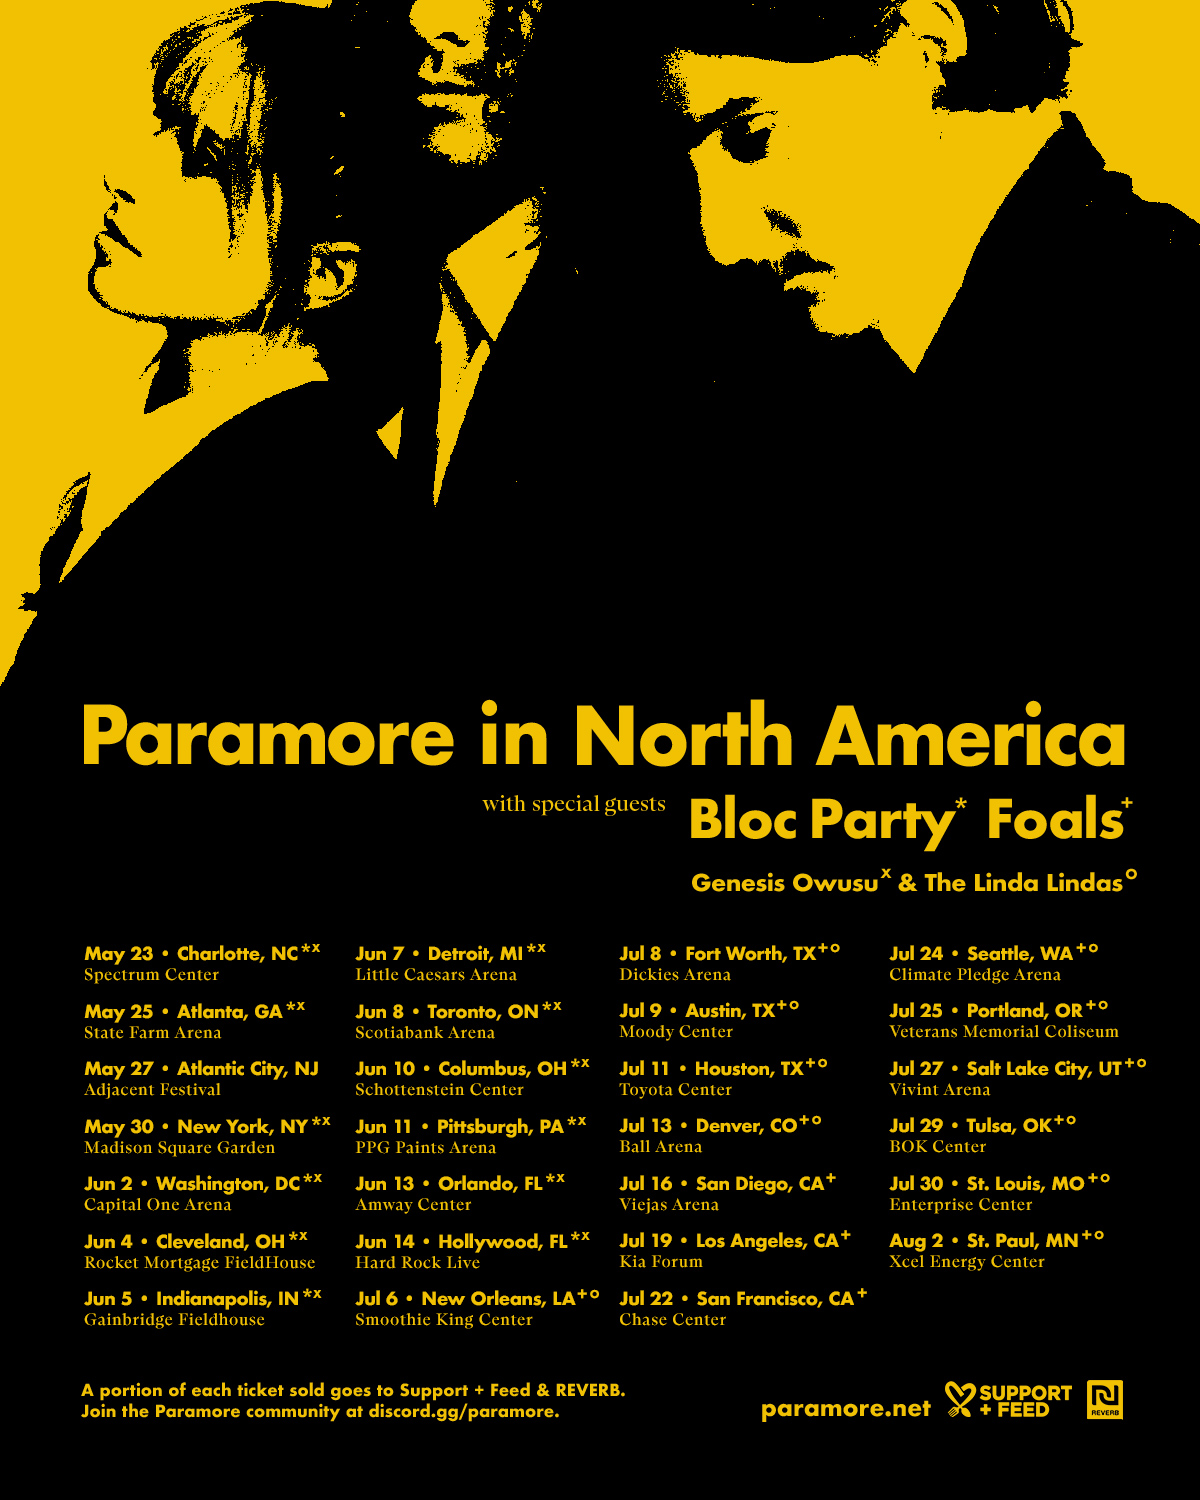 Paramore's North American Tour with Genesis Owusu